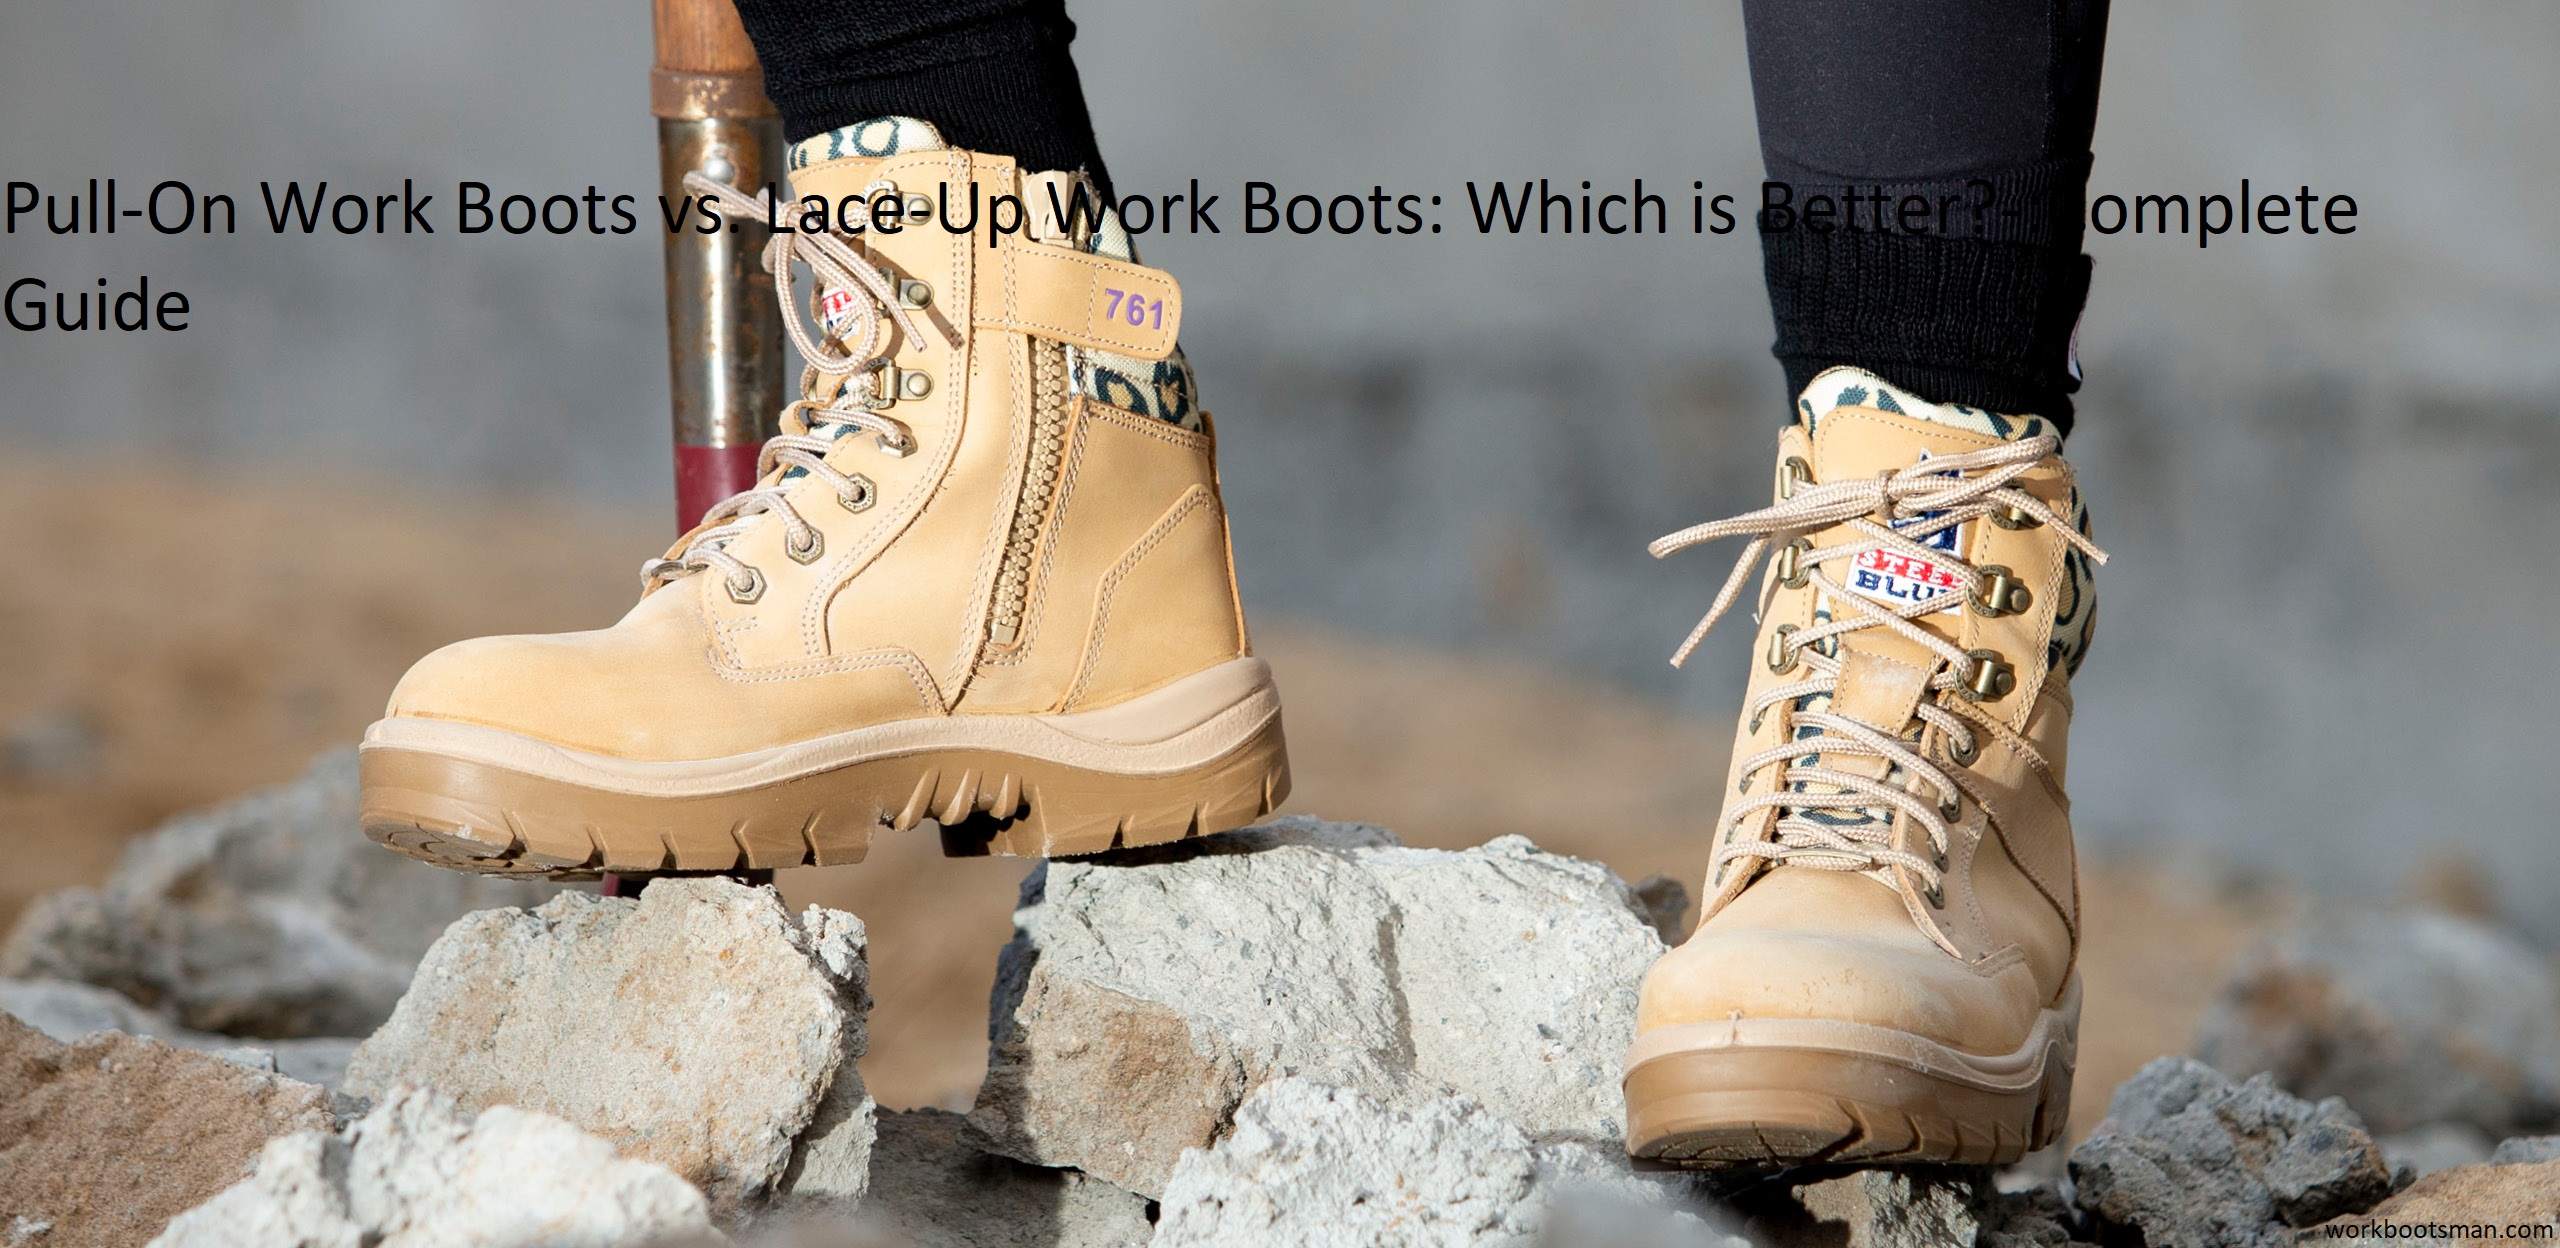 Pull-On Work Boots vs. Lace-Up Work Boots: Which is Better? Complete Guide